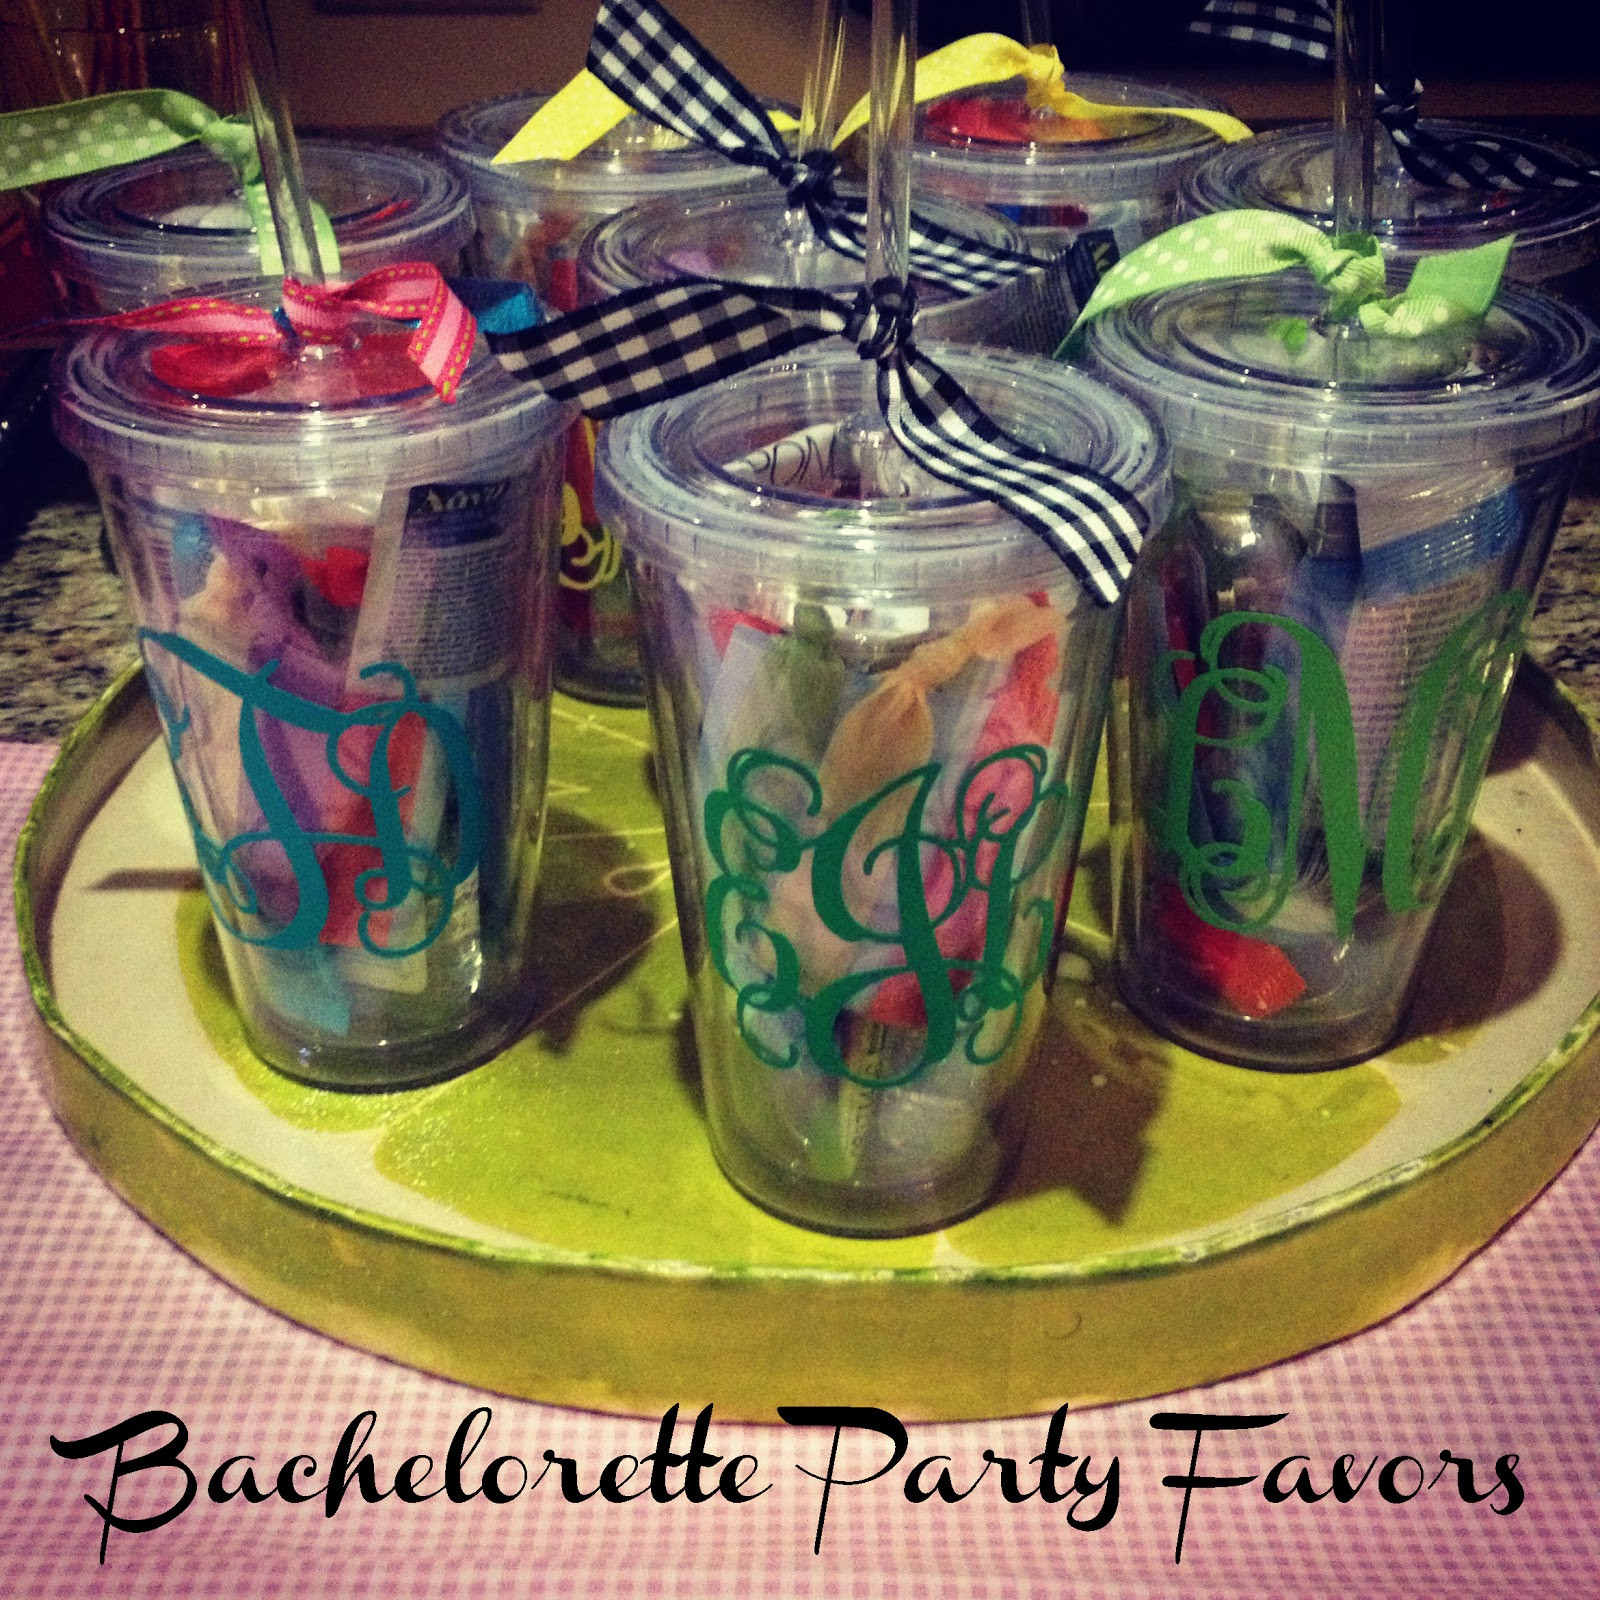 Ideas For Bachelorette Party Gifts
 Just Lovely My Bachelorette Party Favors Survival Kits